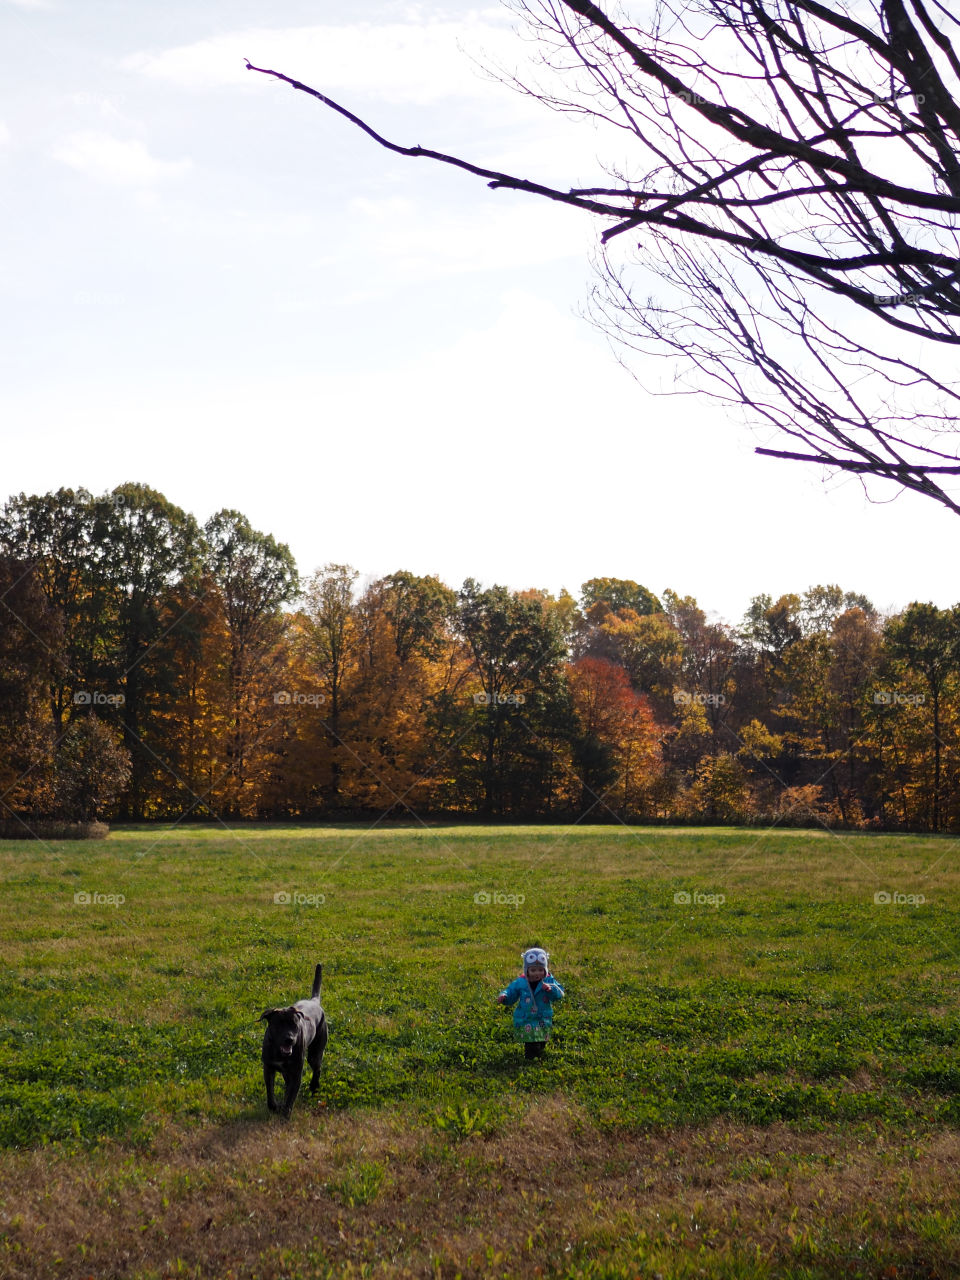 The best of pals, a big dog and a little girl running through the field during the fall.